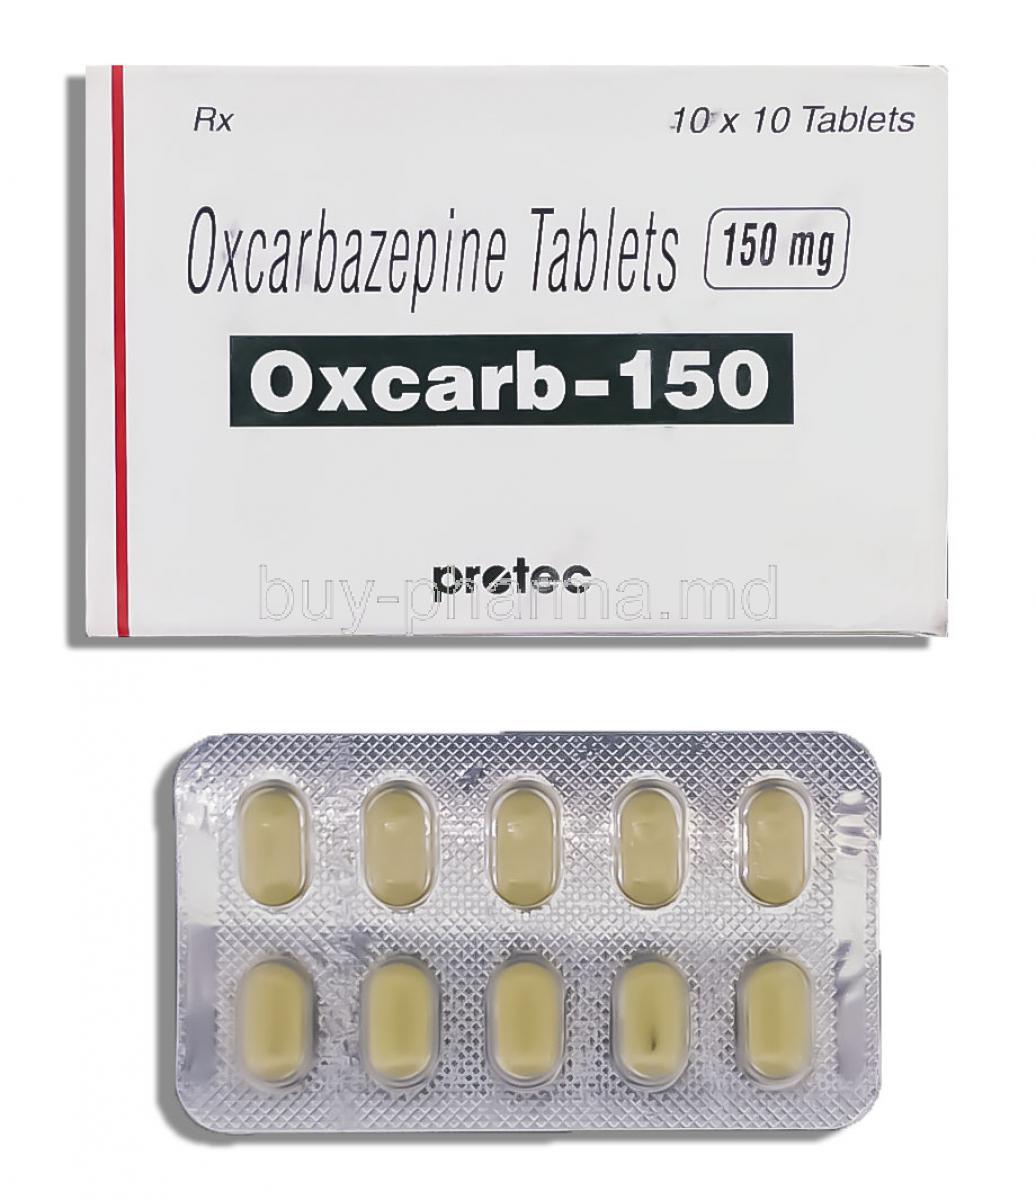 Oxcarb, Oxcarbazepine